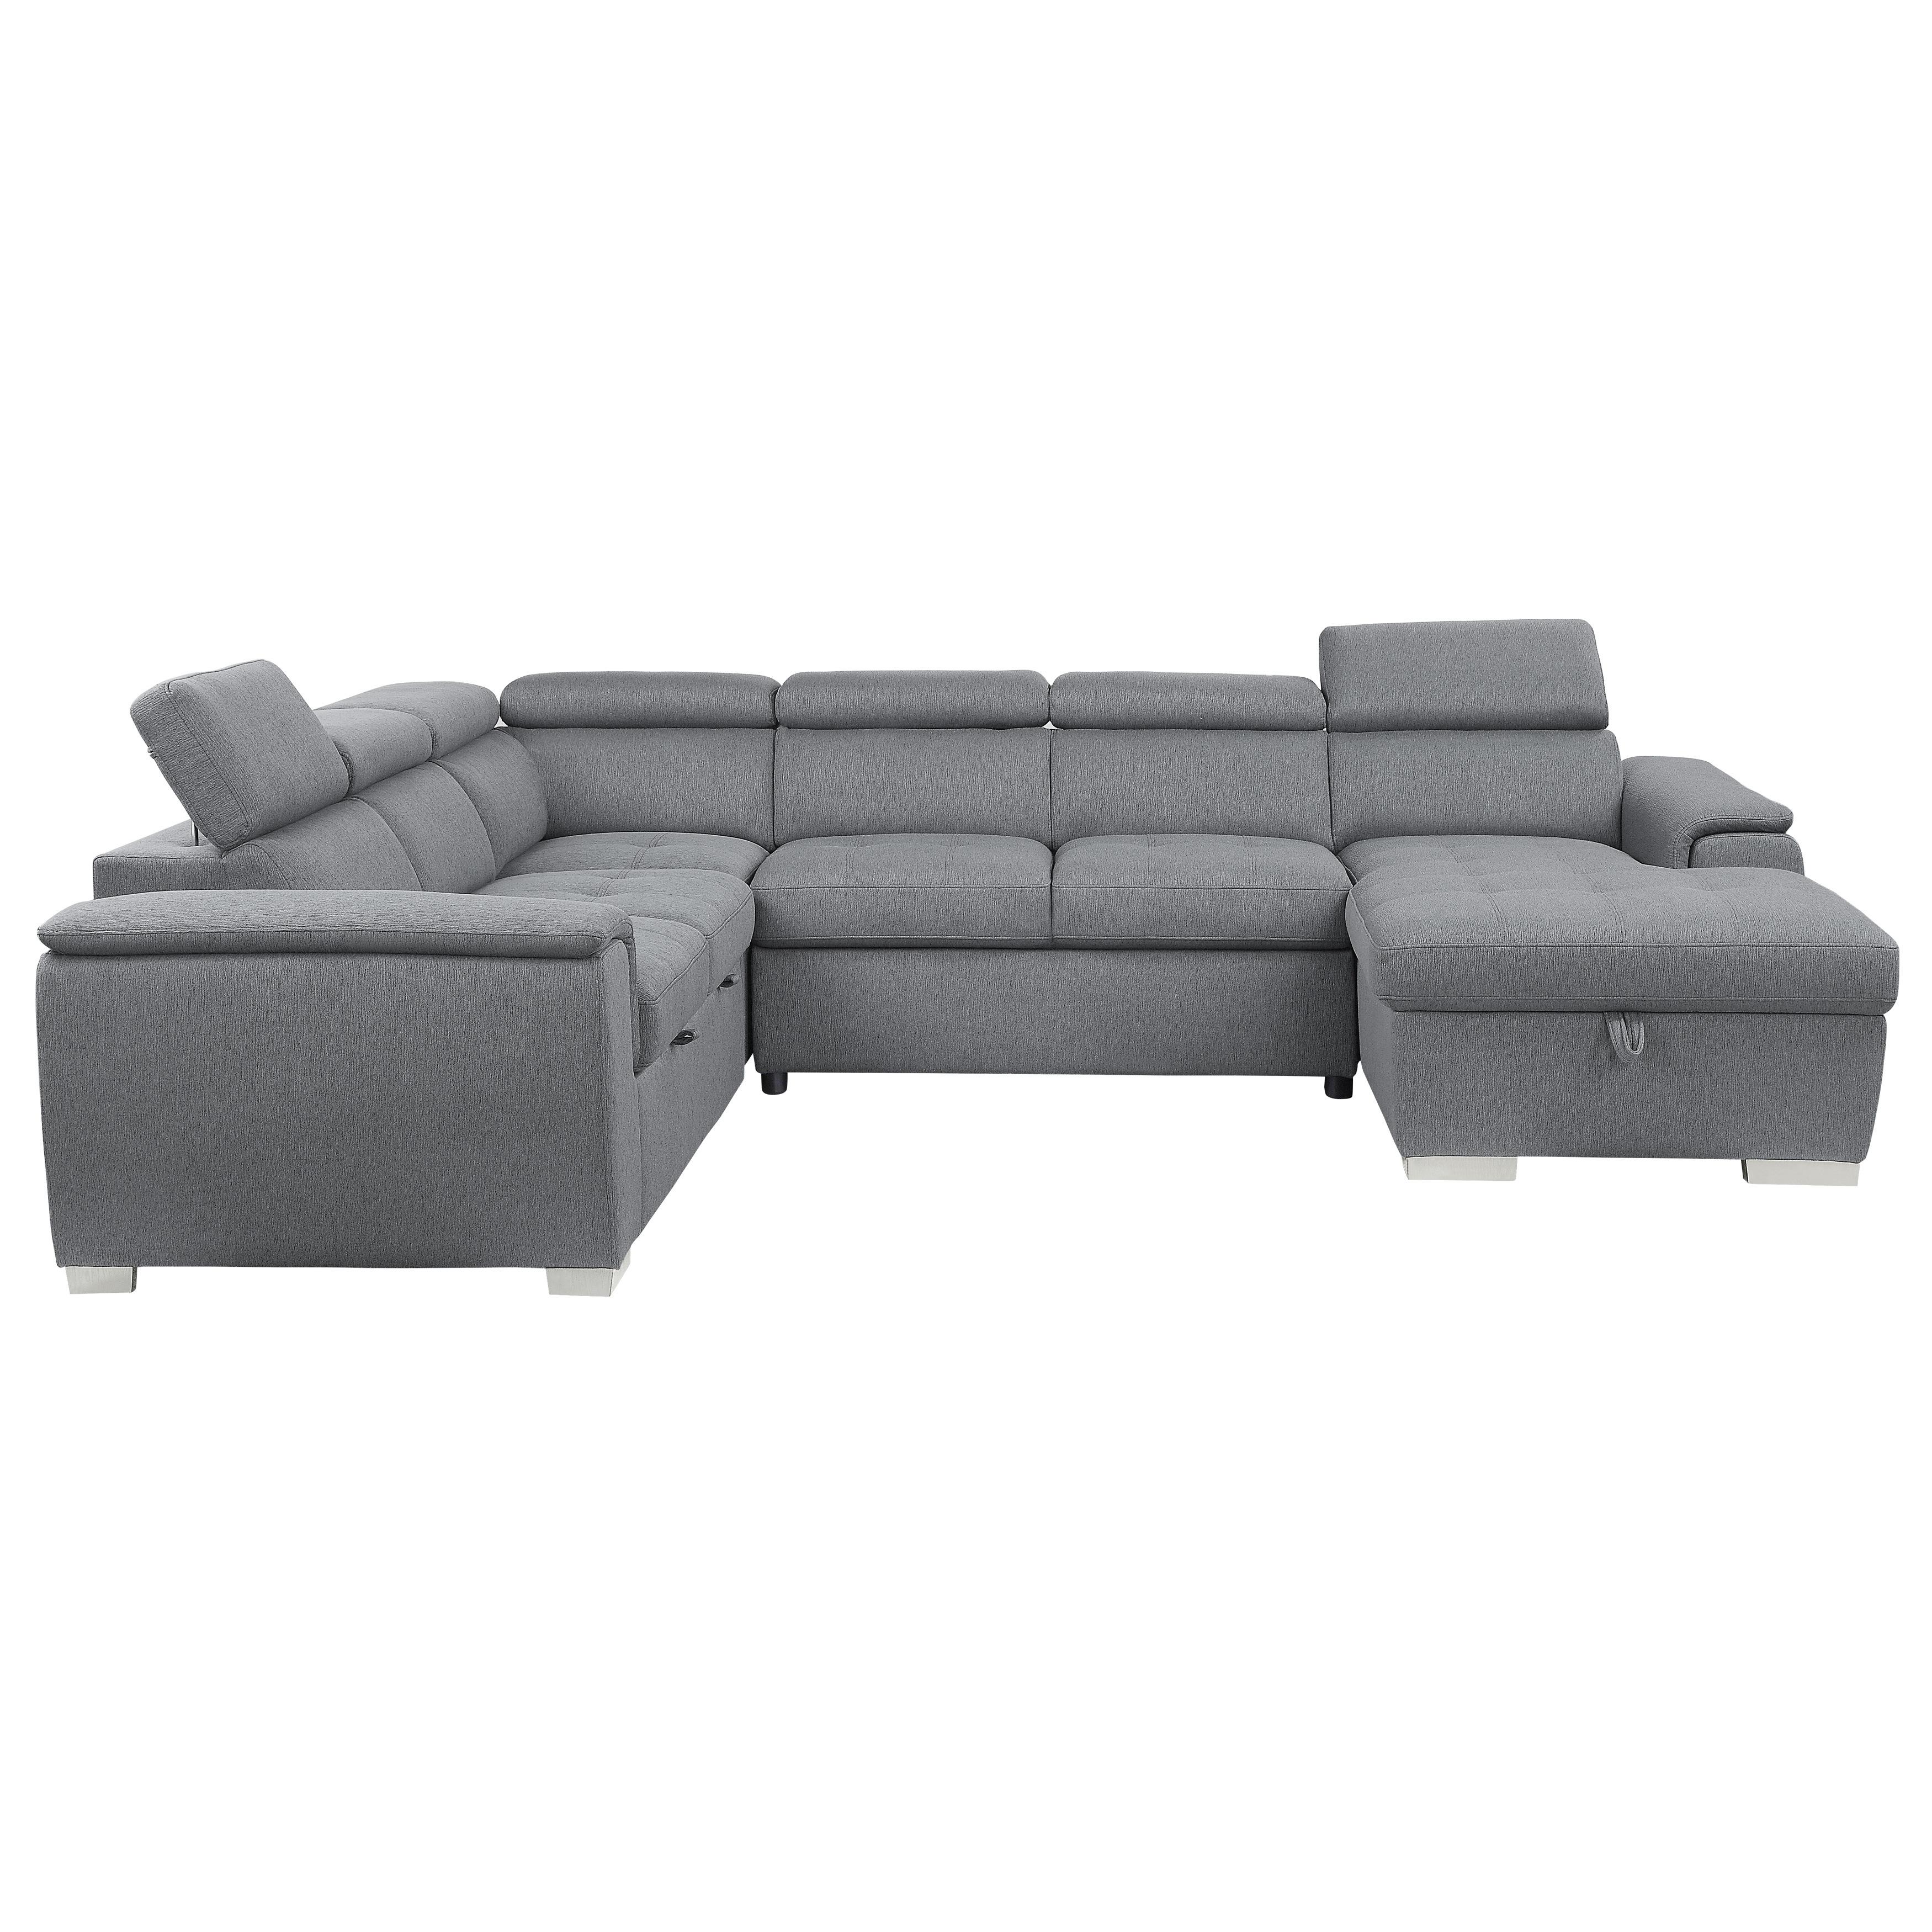 

    
Contemporary Gray Chenille 4-Piece Sectional Homelegance 9355GY*42LRC Berel
